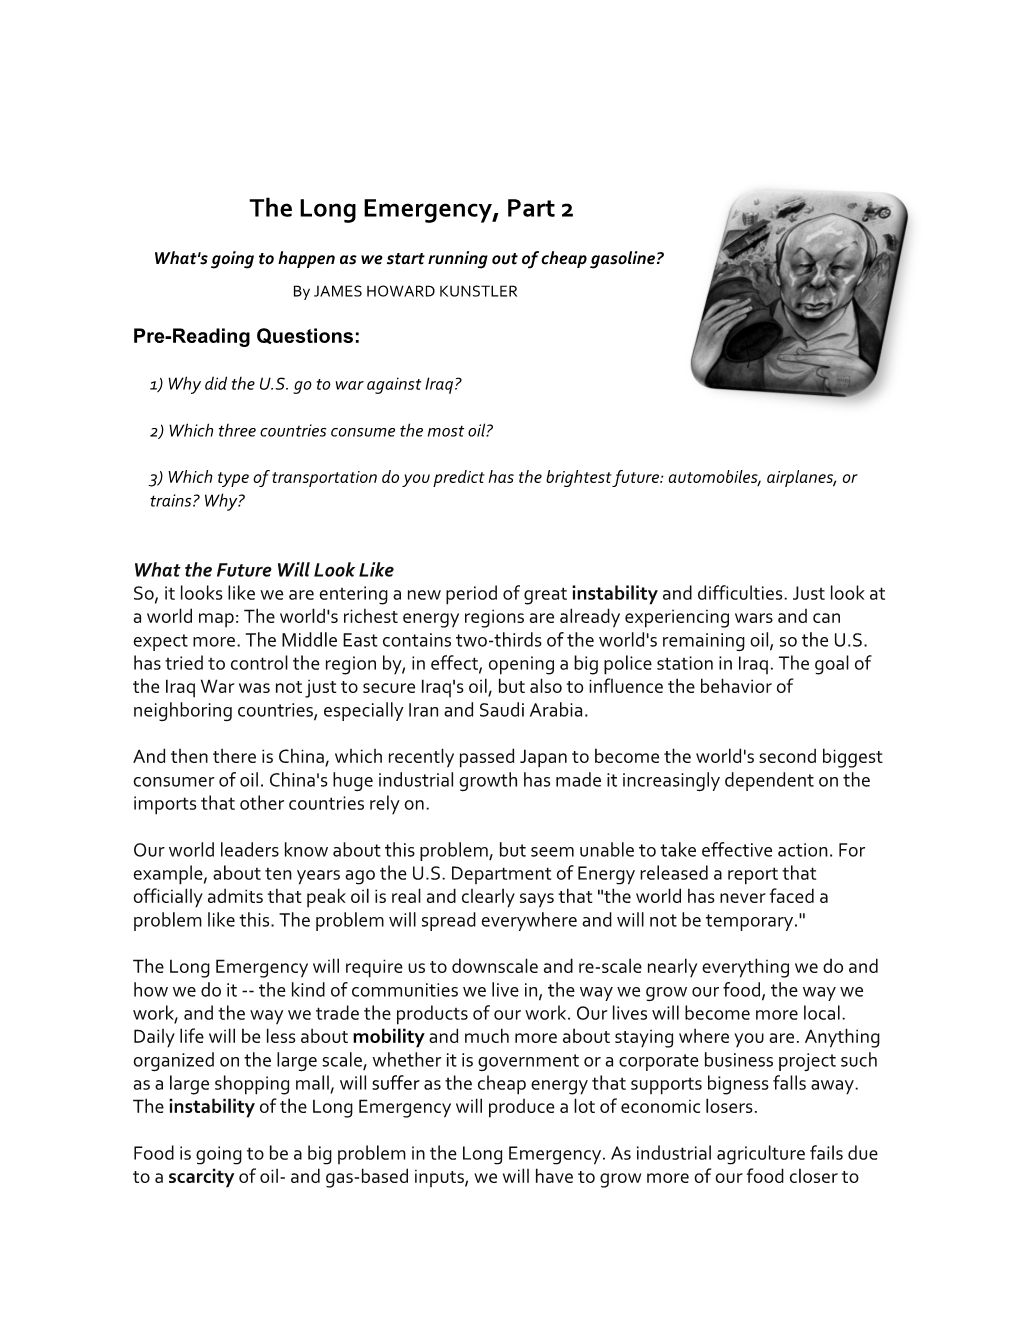 The Long Emergency, Part 2